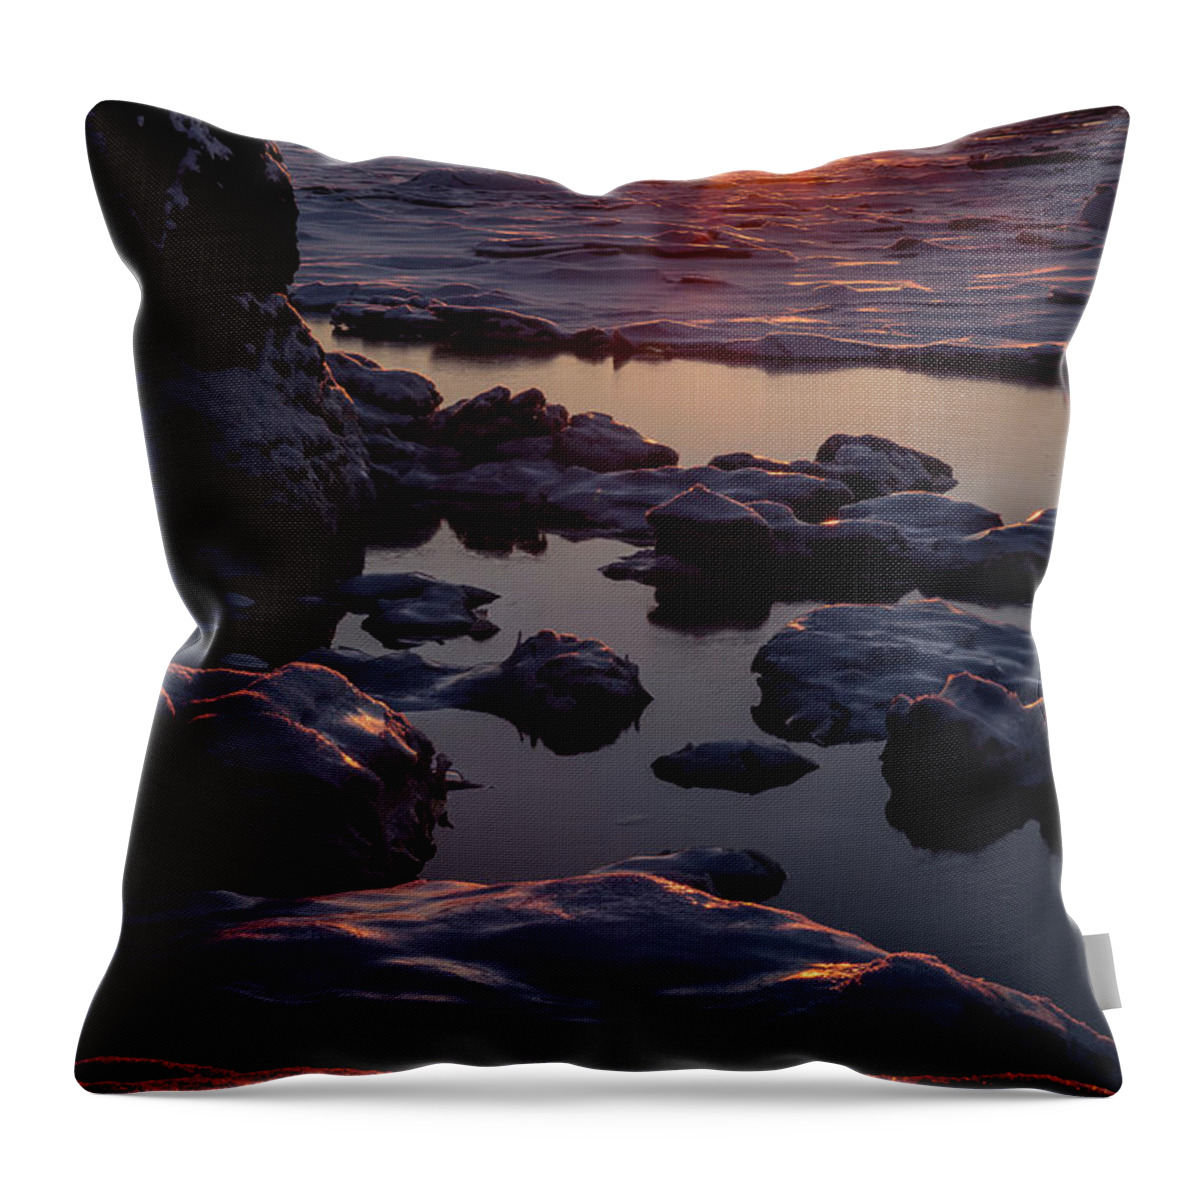 Turnagain Arm Throw Pillow featuring the photograph Turnagain Winter Sunset by Tim Newton